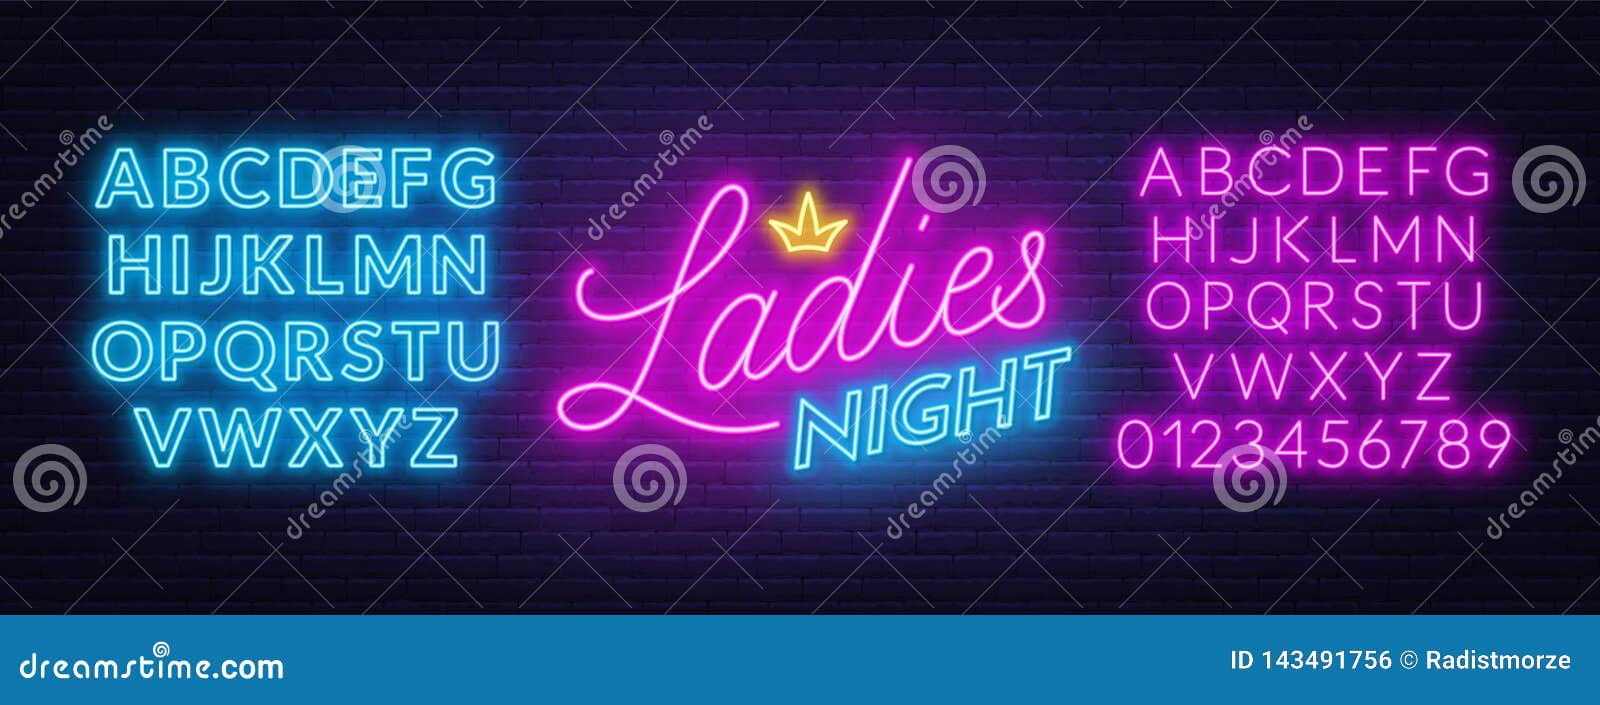 ladies night neon lettering on brick wall background.